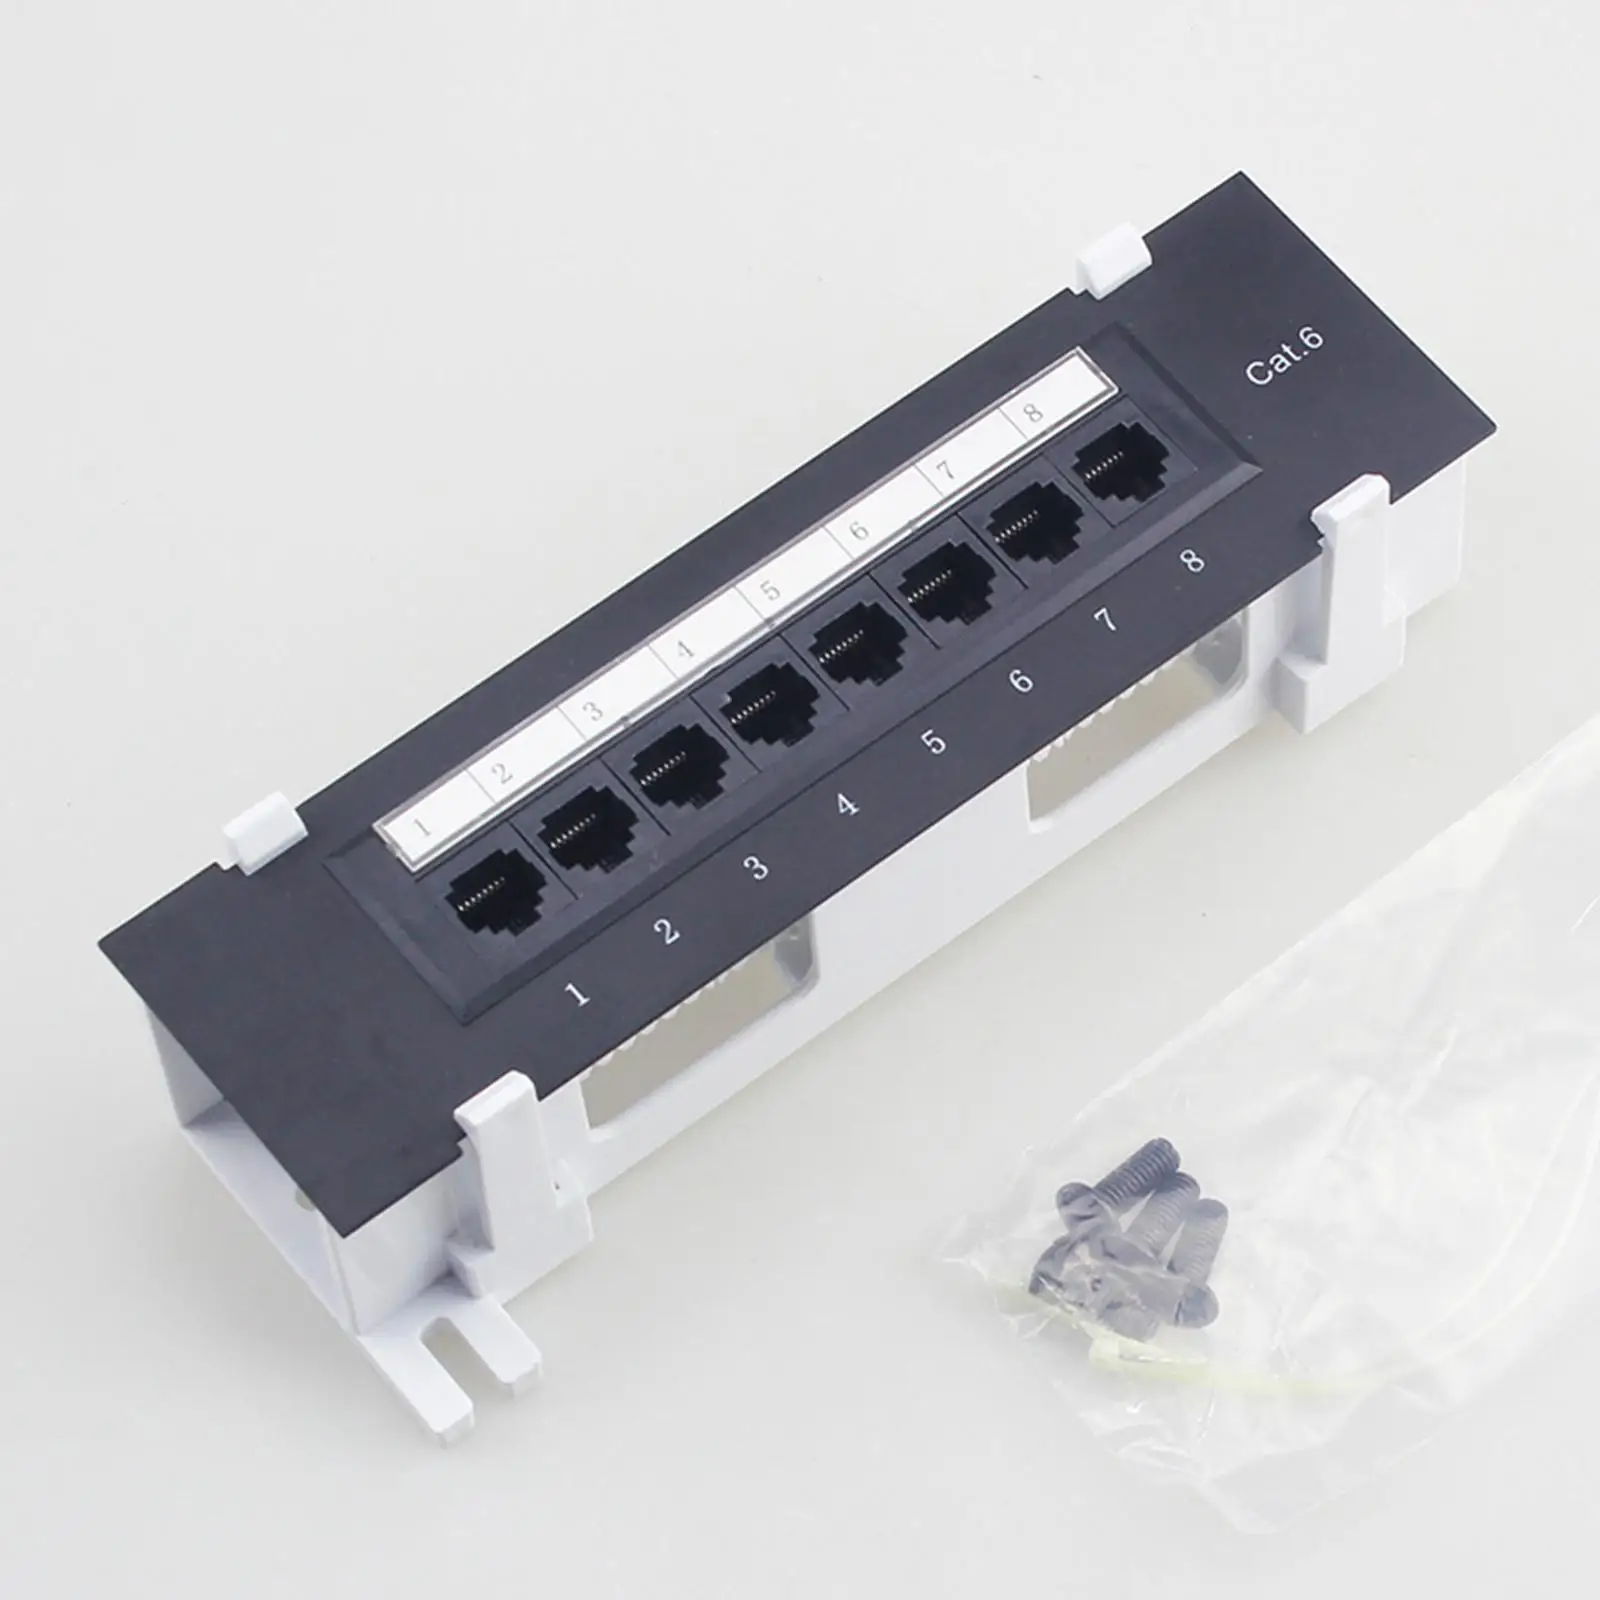 8 Port Shielded Patch Panel for Cat. 6 Versatile Data Center Plastic Wall Mount for Computer Home for Wiring Server Room Office